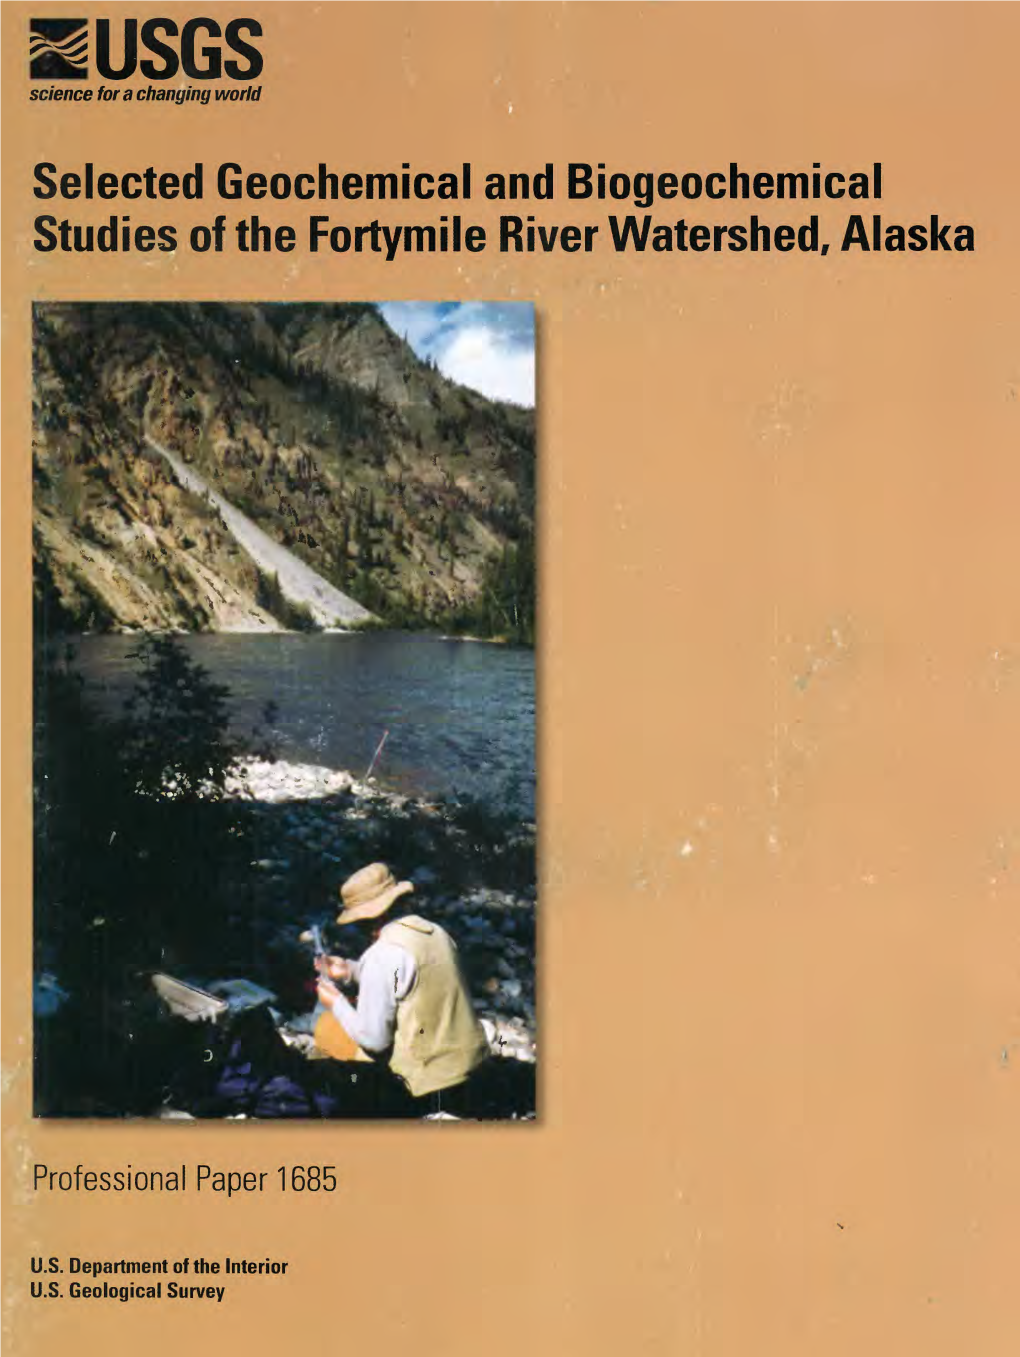 Selected Geochemical and Biogeochemical Studies of the Fortymile River Watershed, Alaska